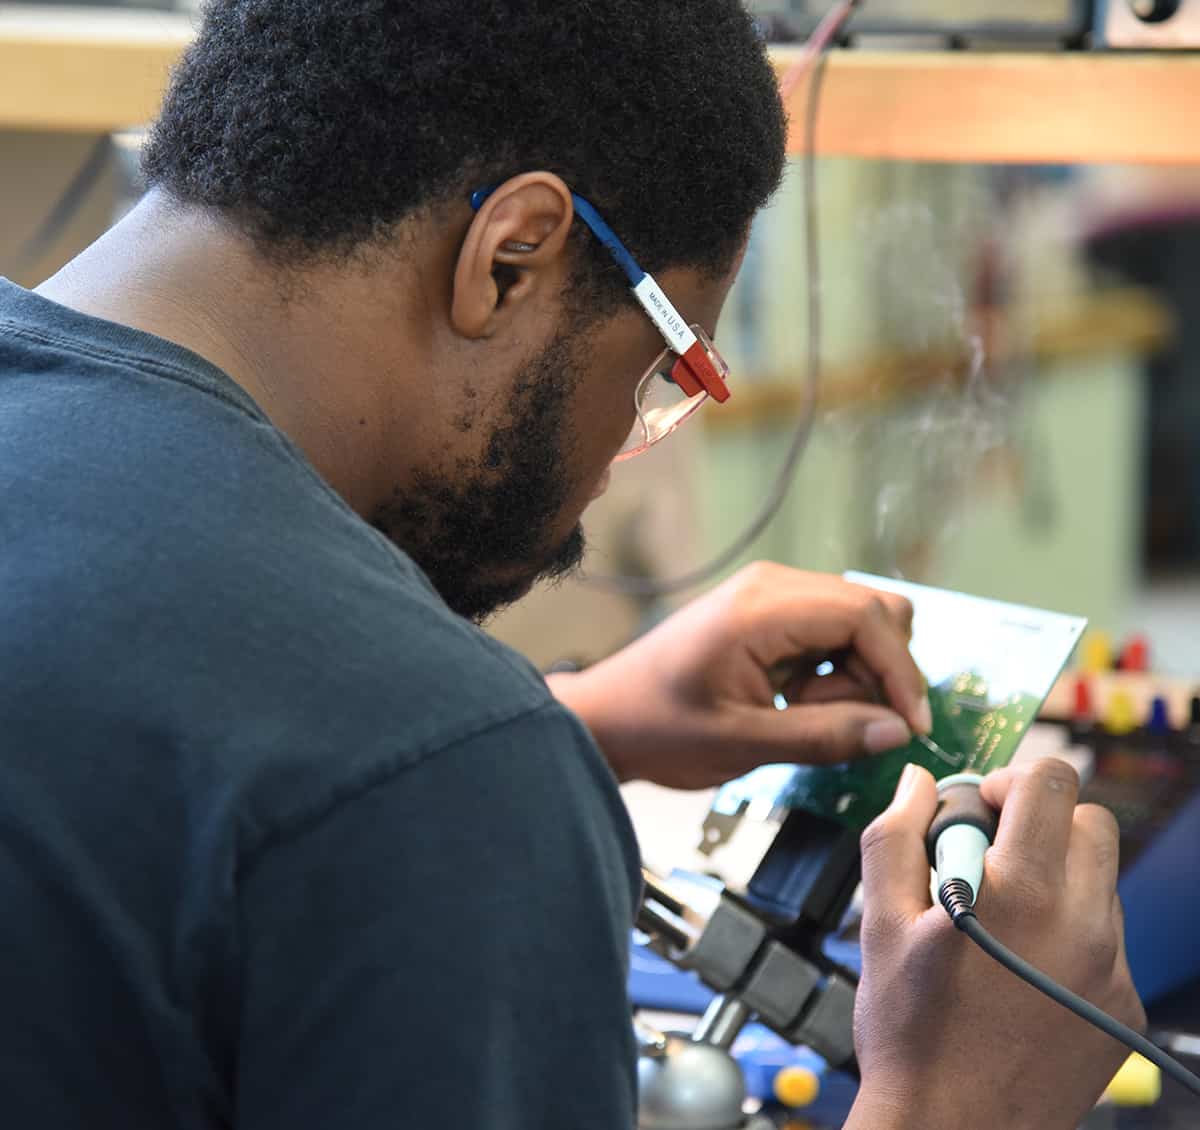 Want to learn new skills for the New Year. Register for Spring Semester classes at South Georgia Technical College. Registration is Tuesday, January 7th and classes begin January 9th. Start training for a new career in 2020!